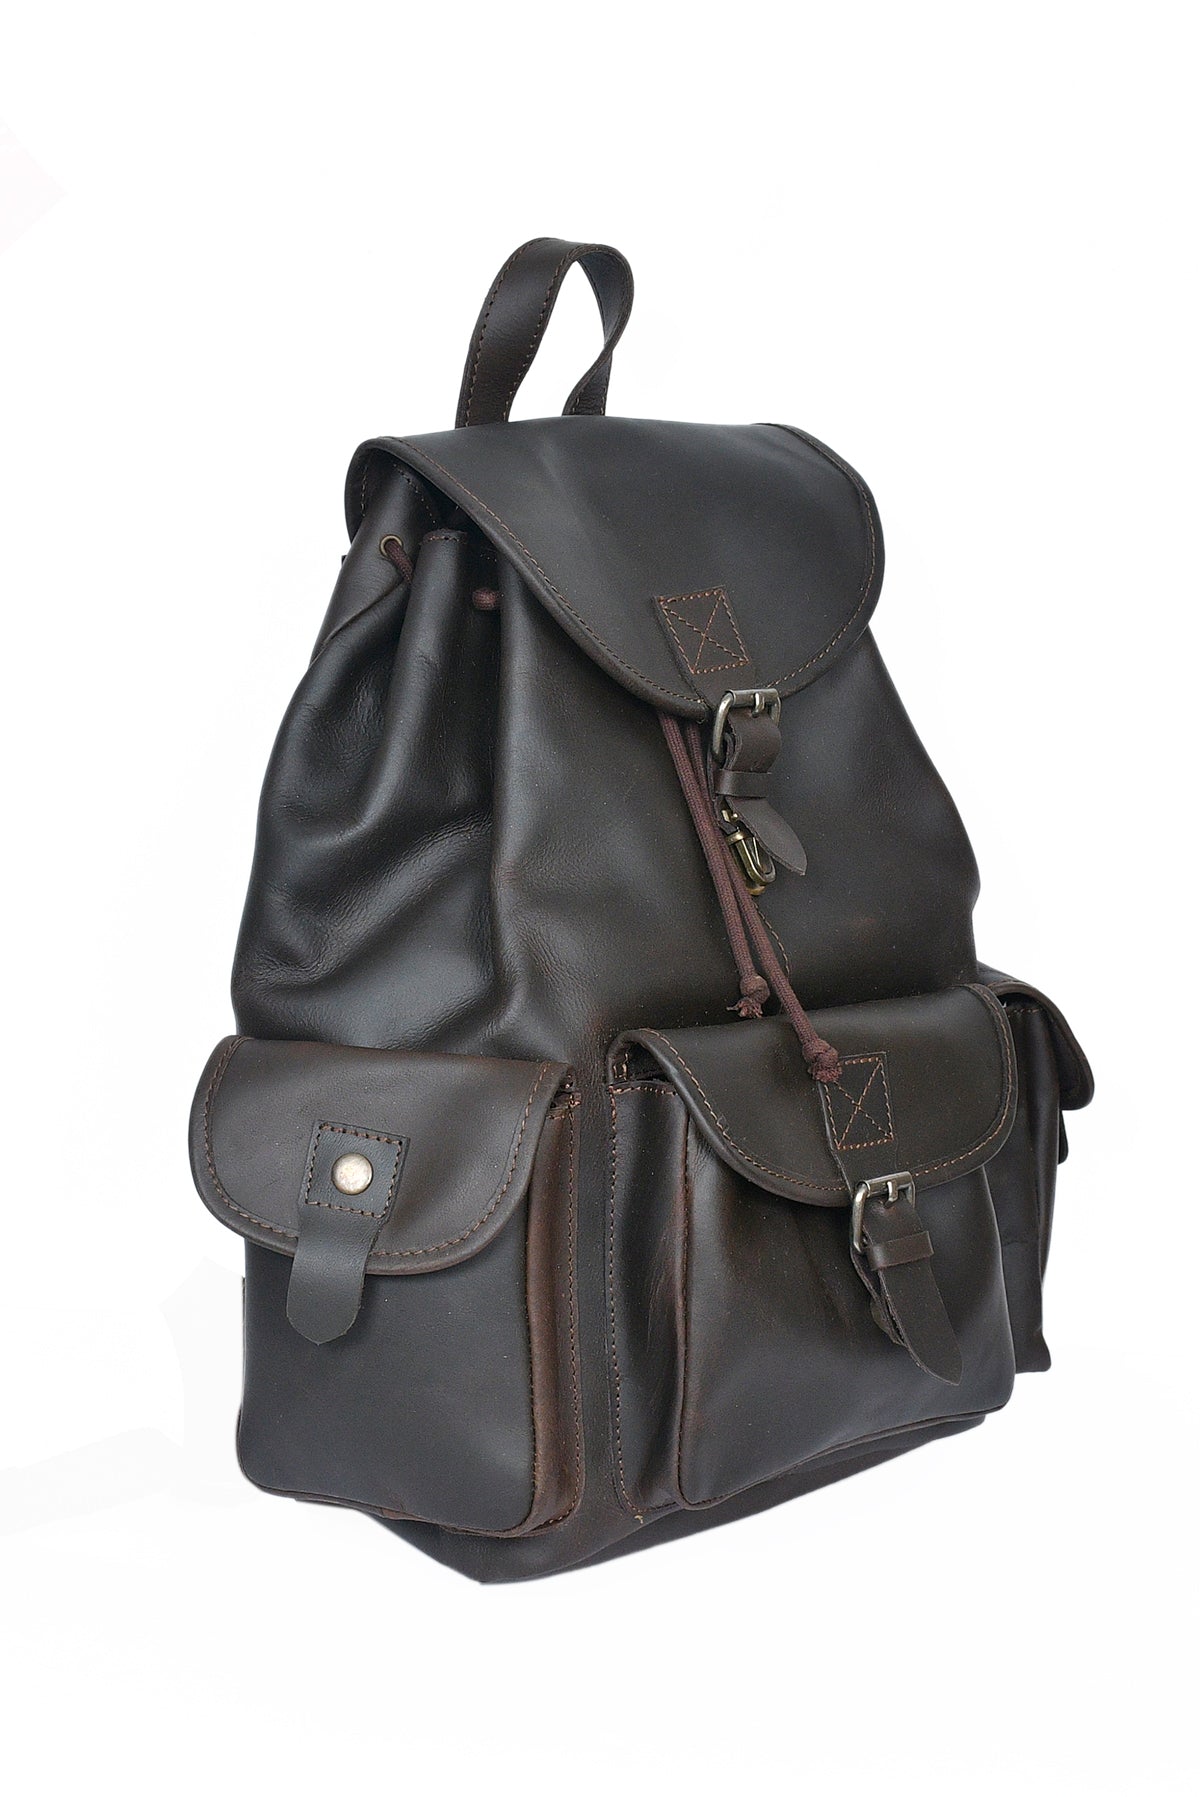 Brown Leather Backpack: Timeless Style and Versatility - CELTICINDIA